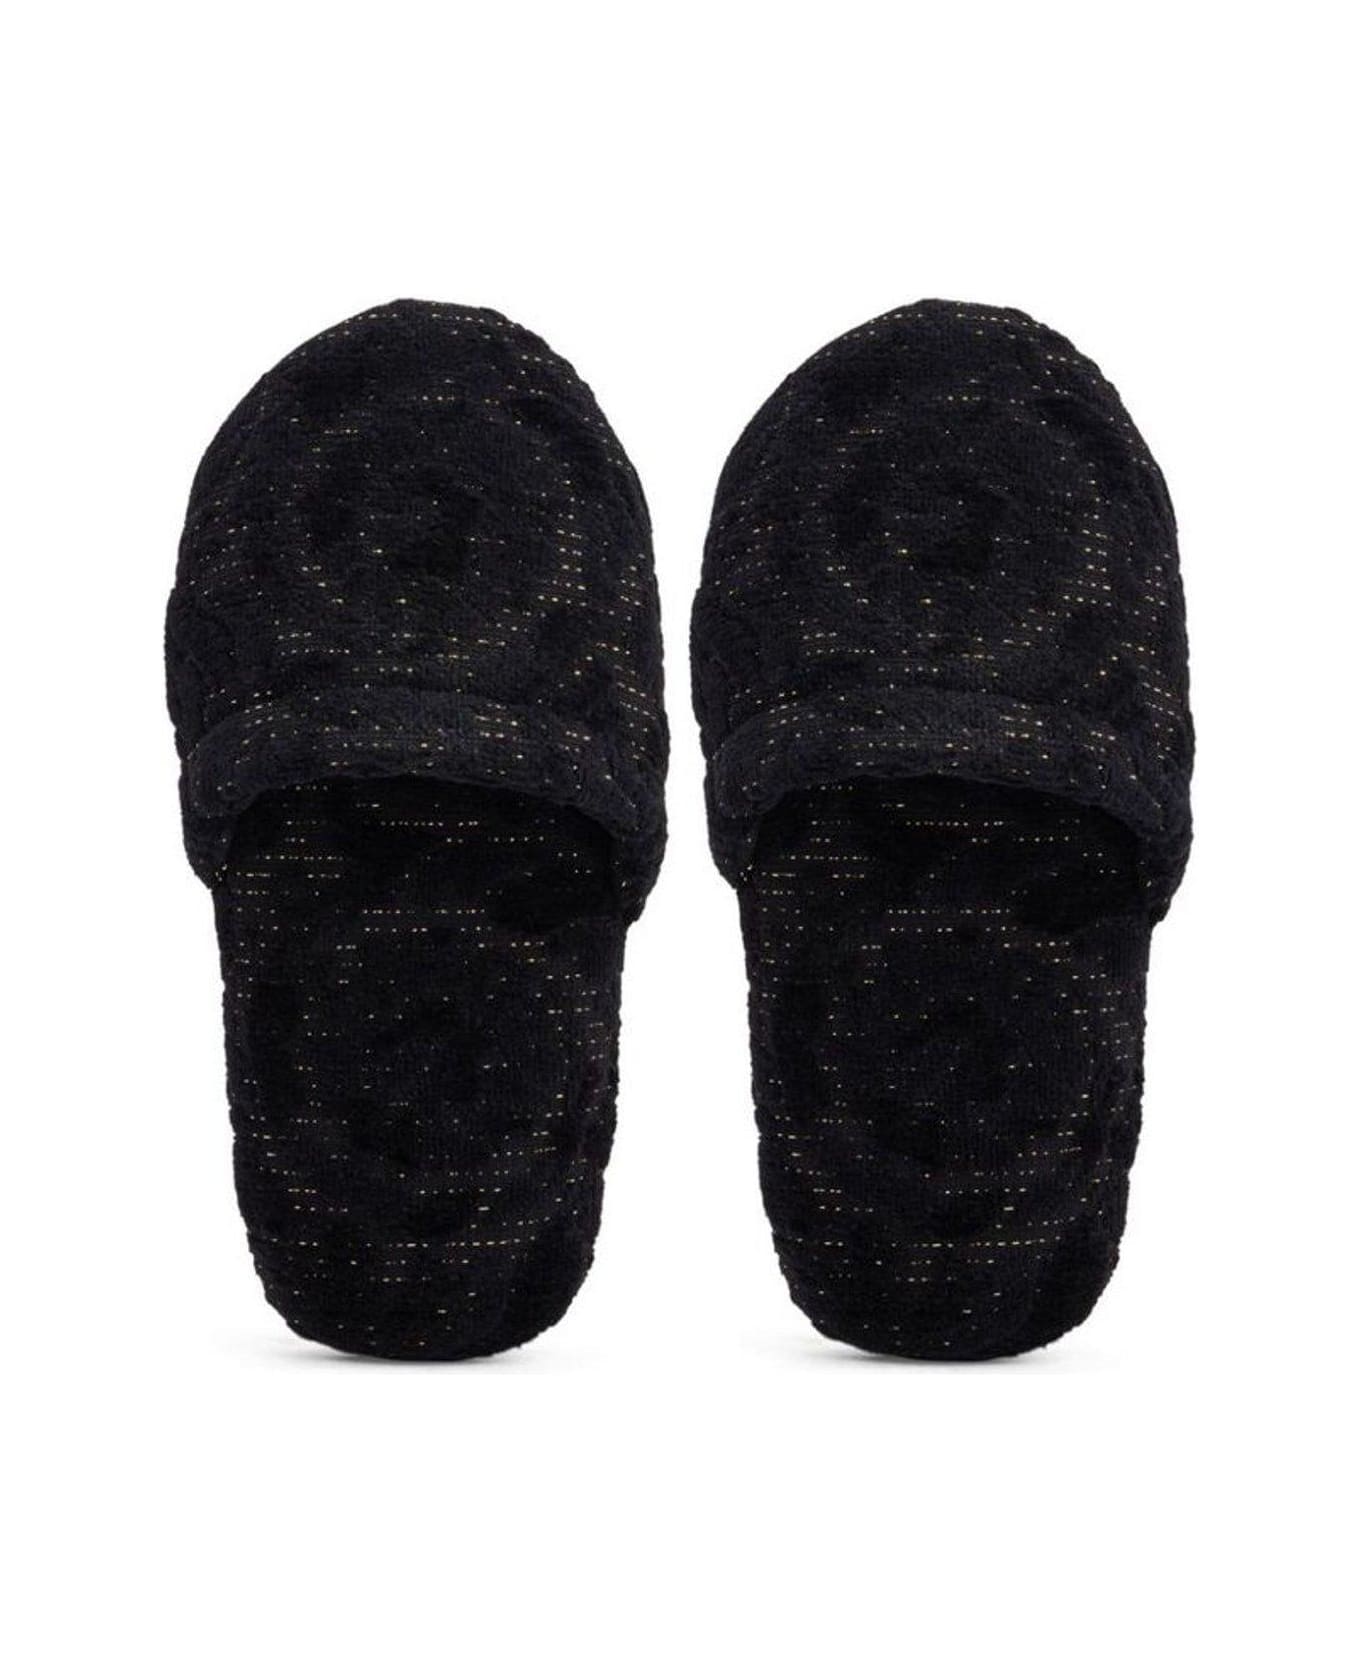 Versace Round-toe Barocco Patterned Slides - BLACK/GOLD その他各種シューズ